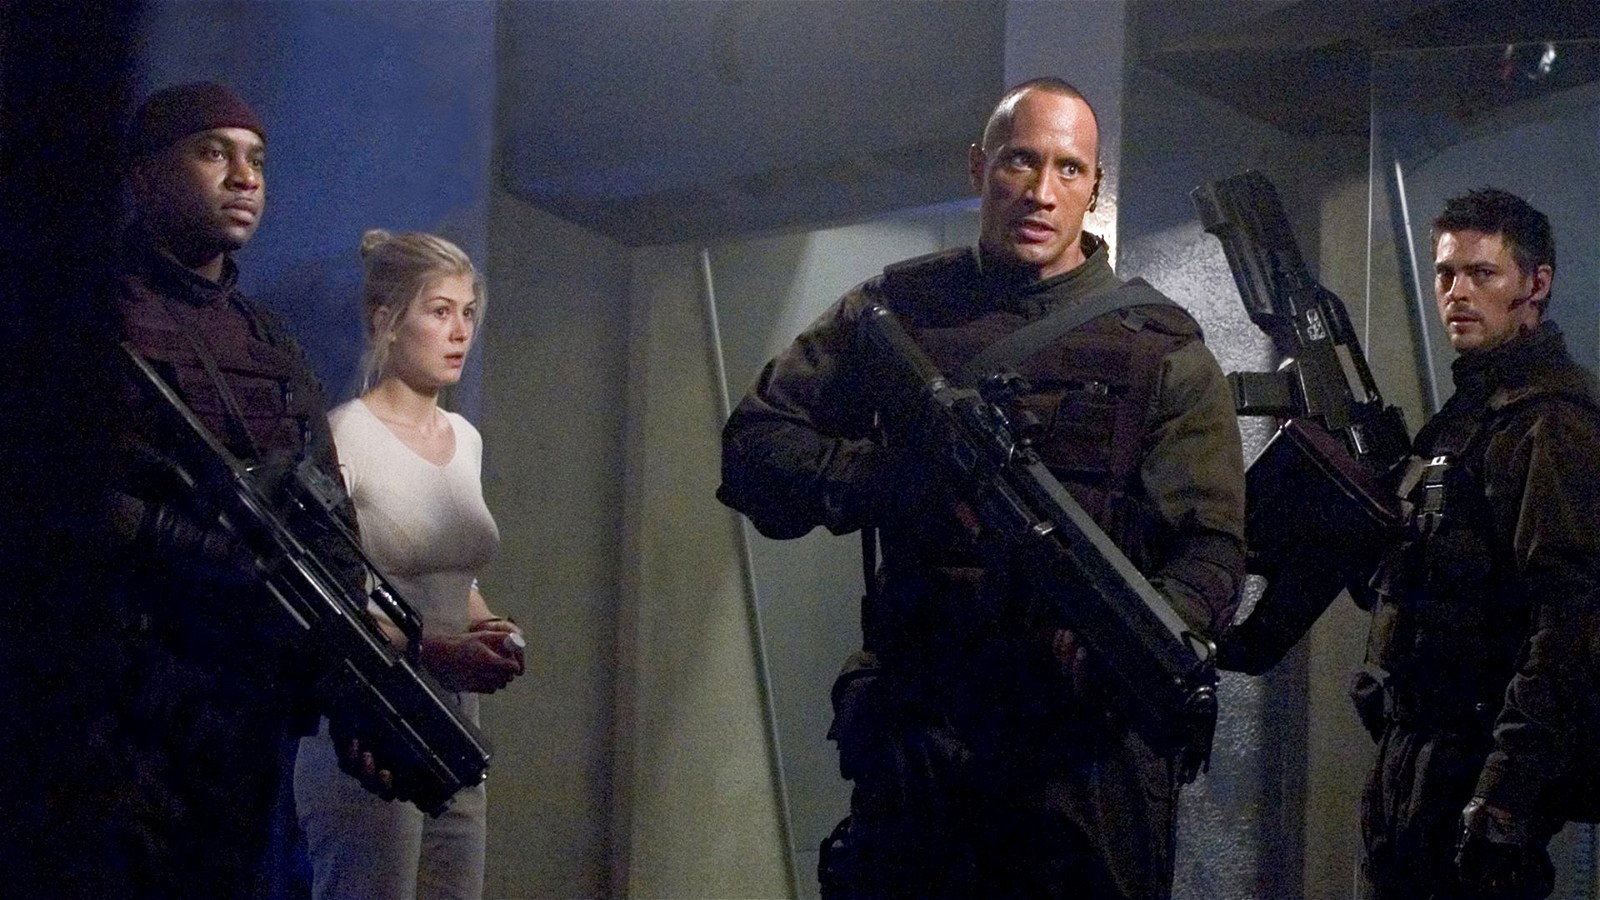 Dwayne Johnson and Rosamund Pike in a still from the film